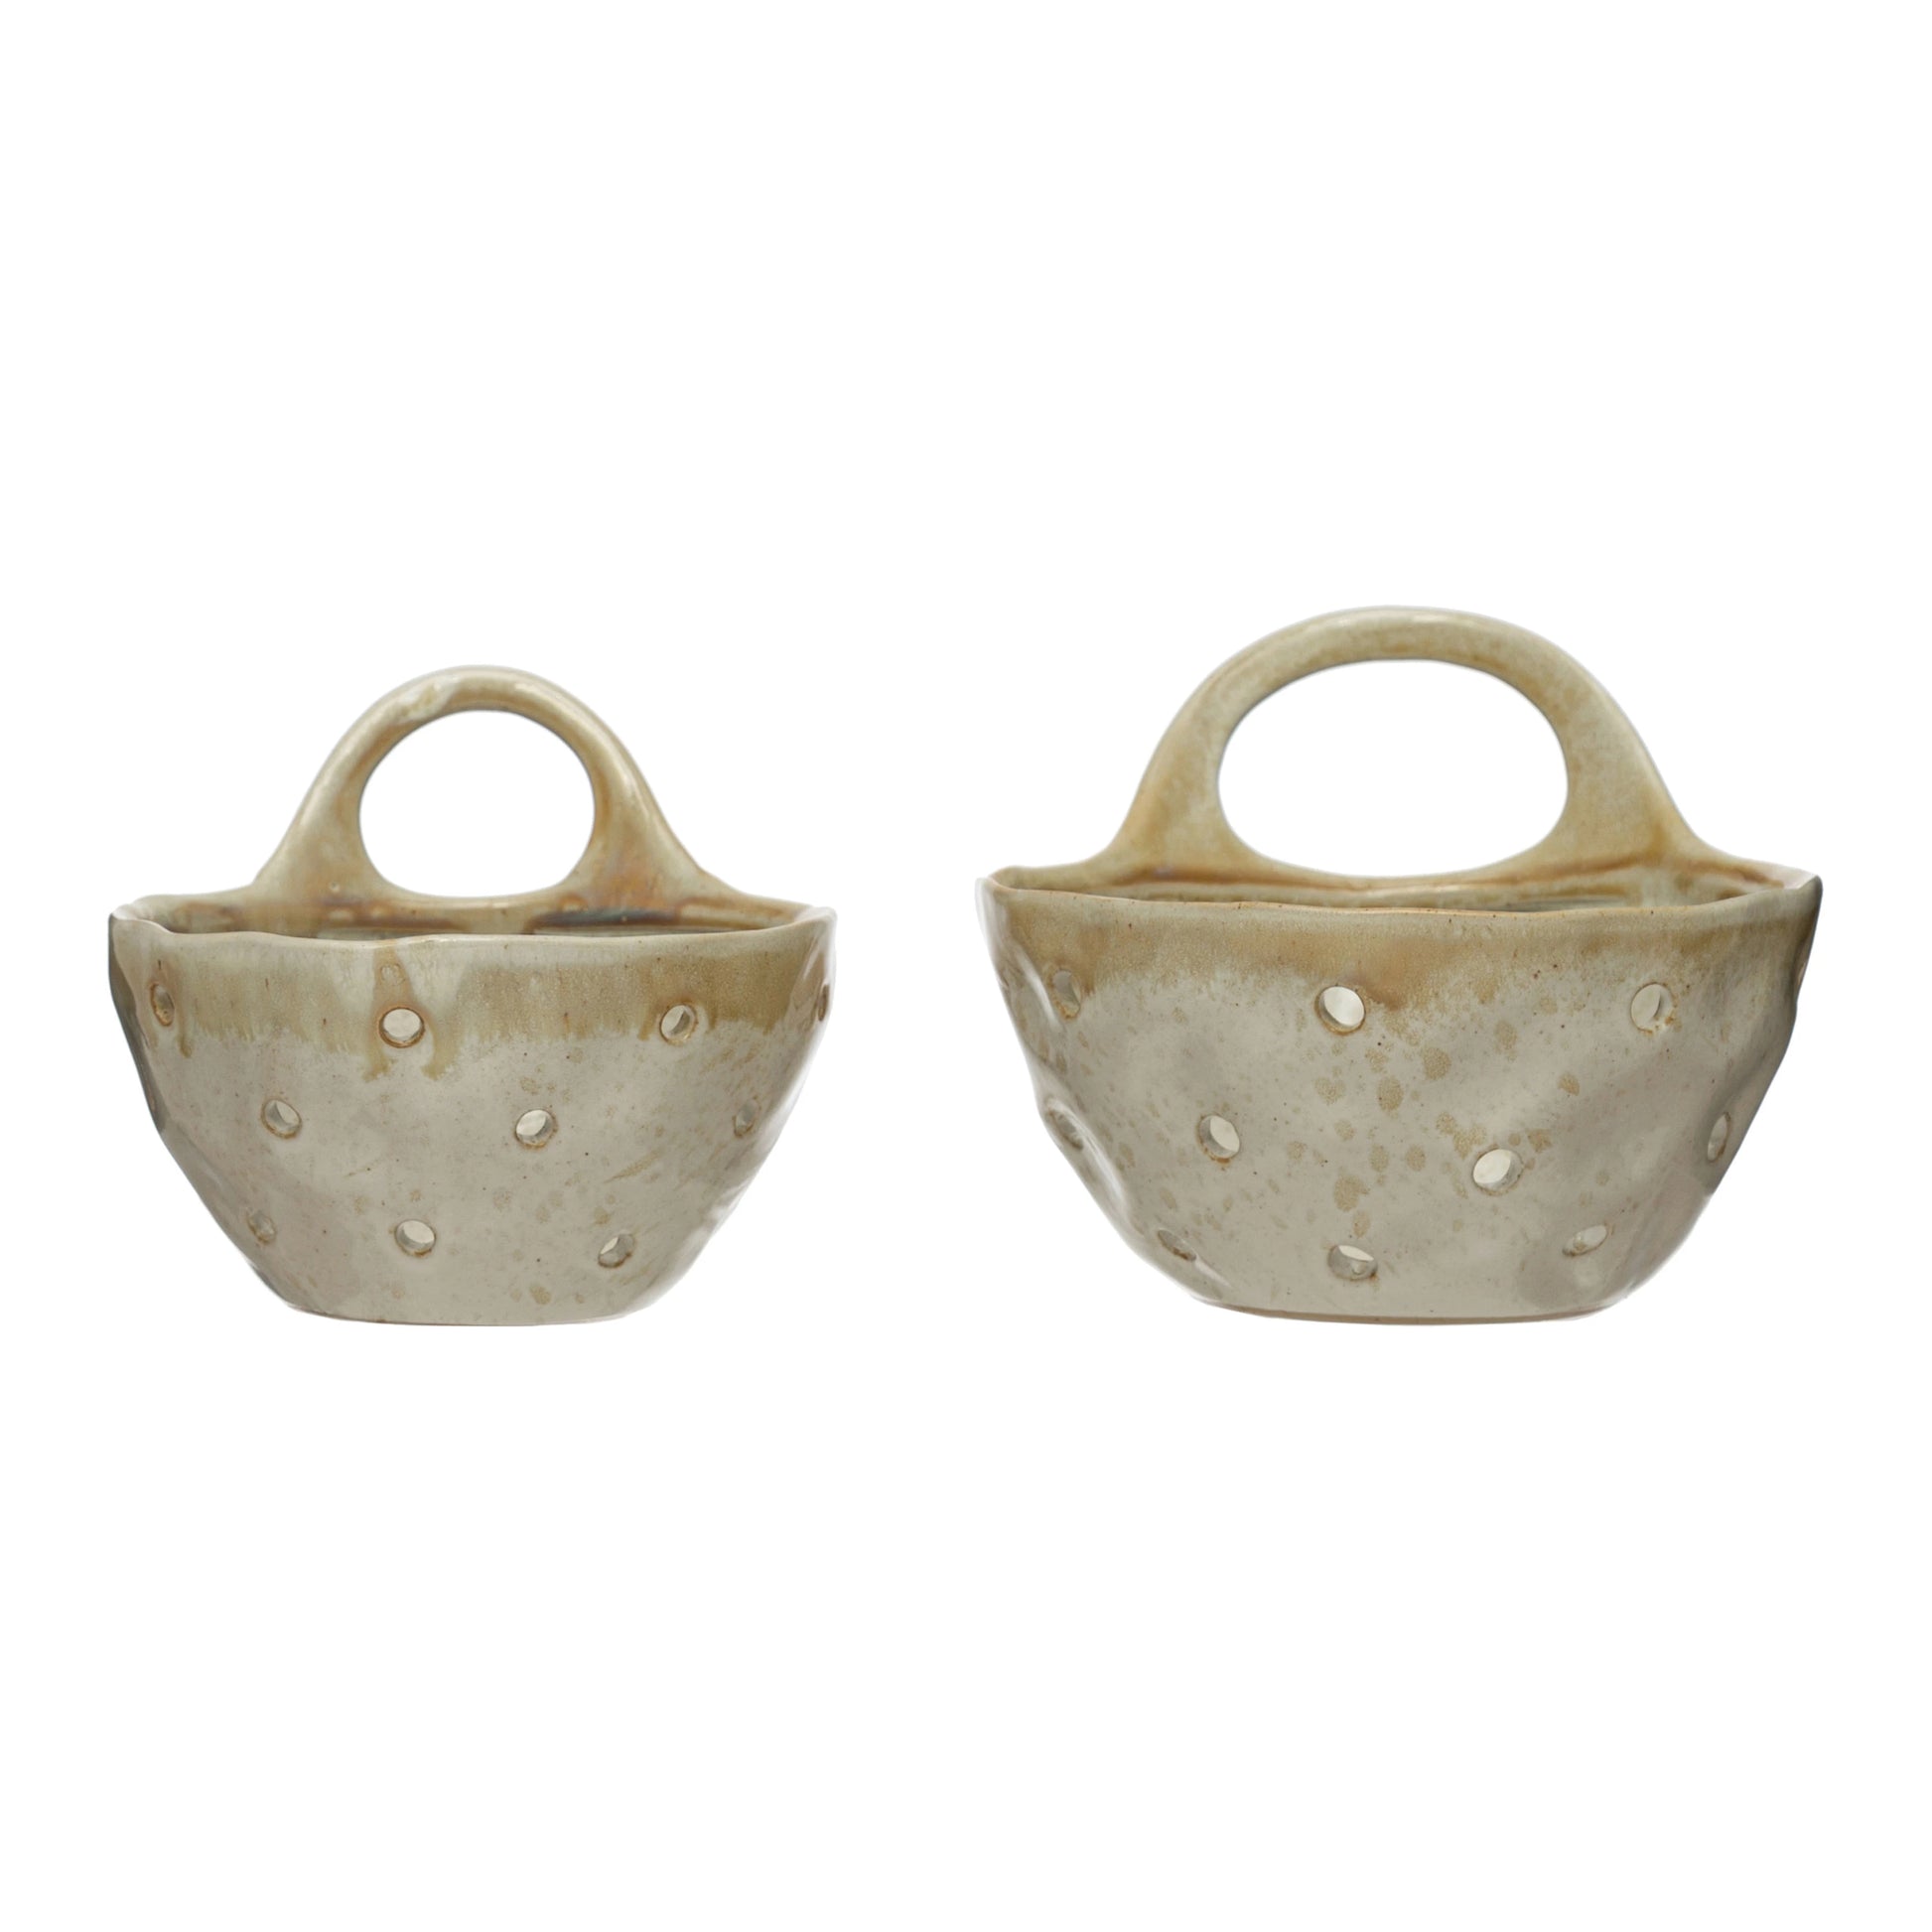 front view of the small and large stoneware colanders with handles on a white background